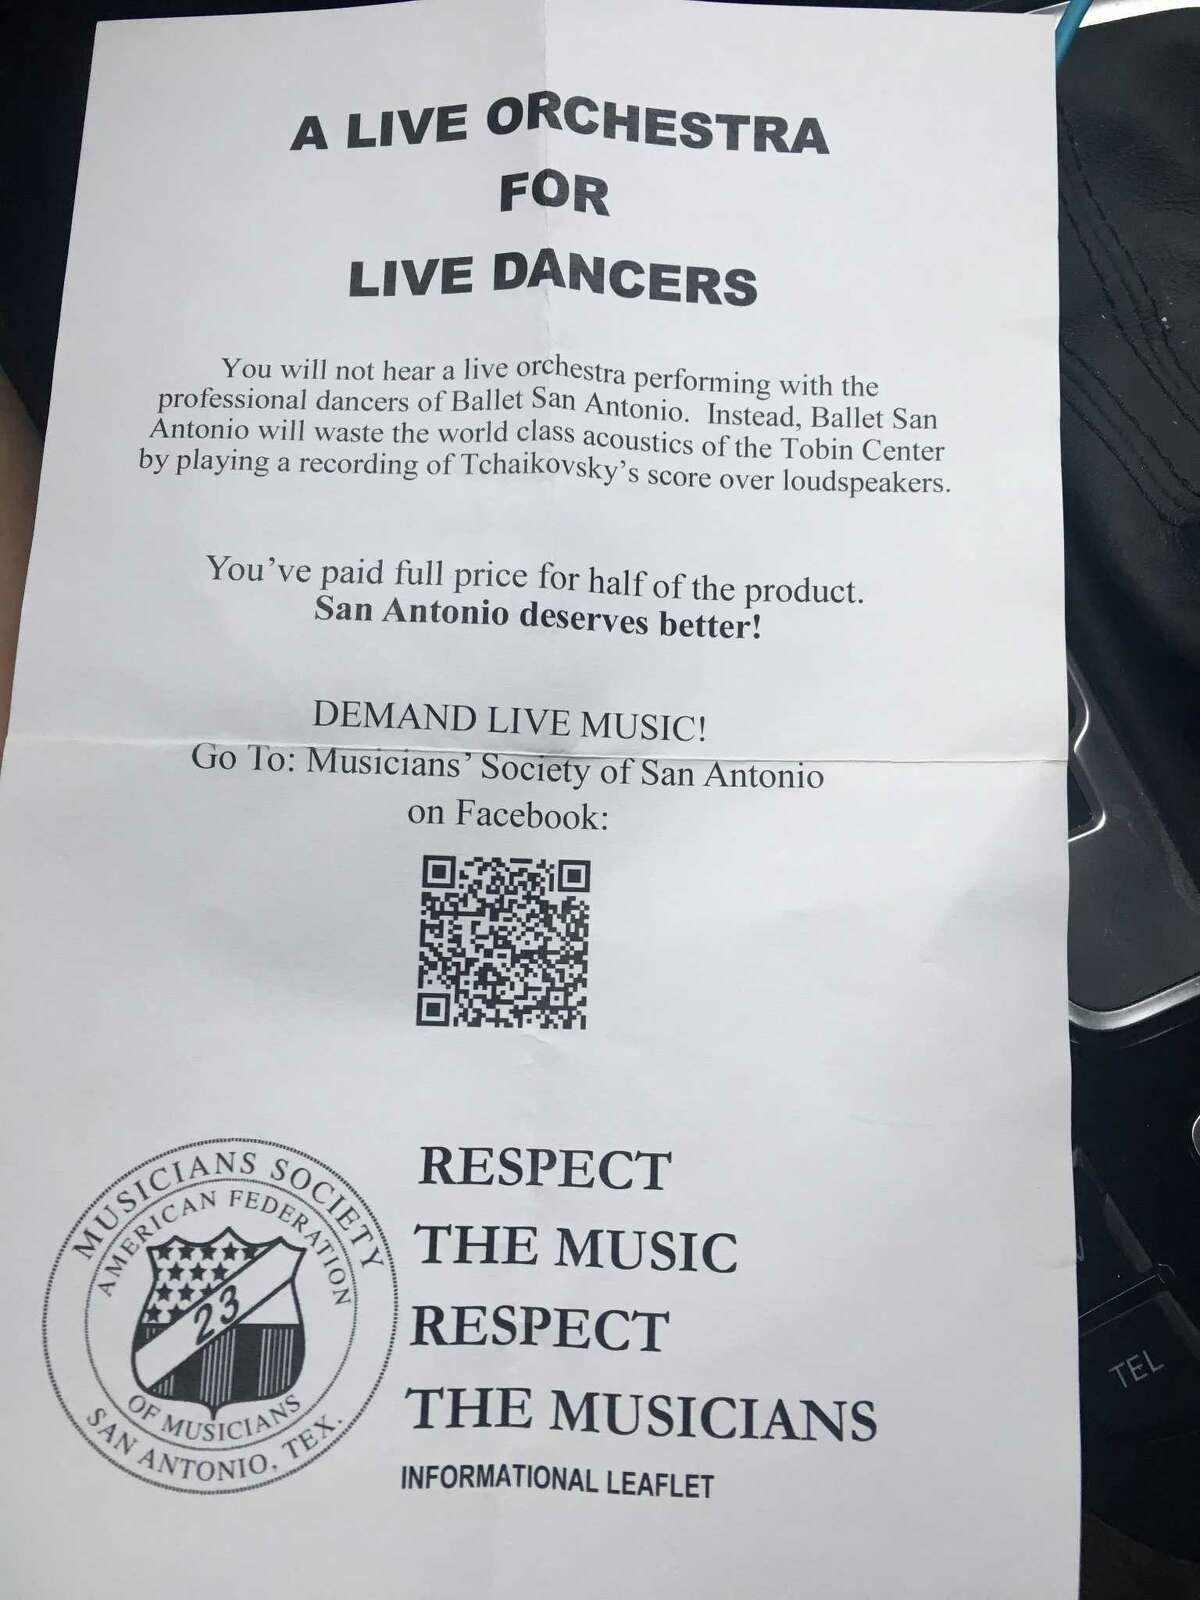 Members of the Musicians Society of San Antonio handed out these fliers to protest the use of pre-recorded music rather than a live symphony at the Ballet San Antonio production of “Sleeping Beauty” in February.